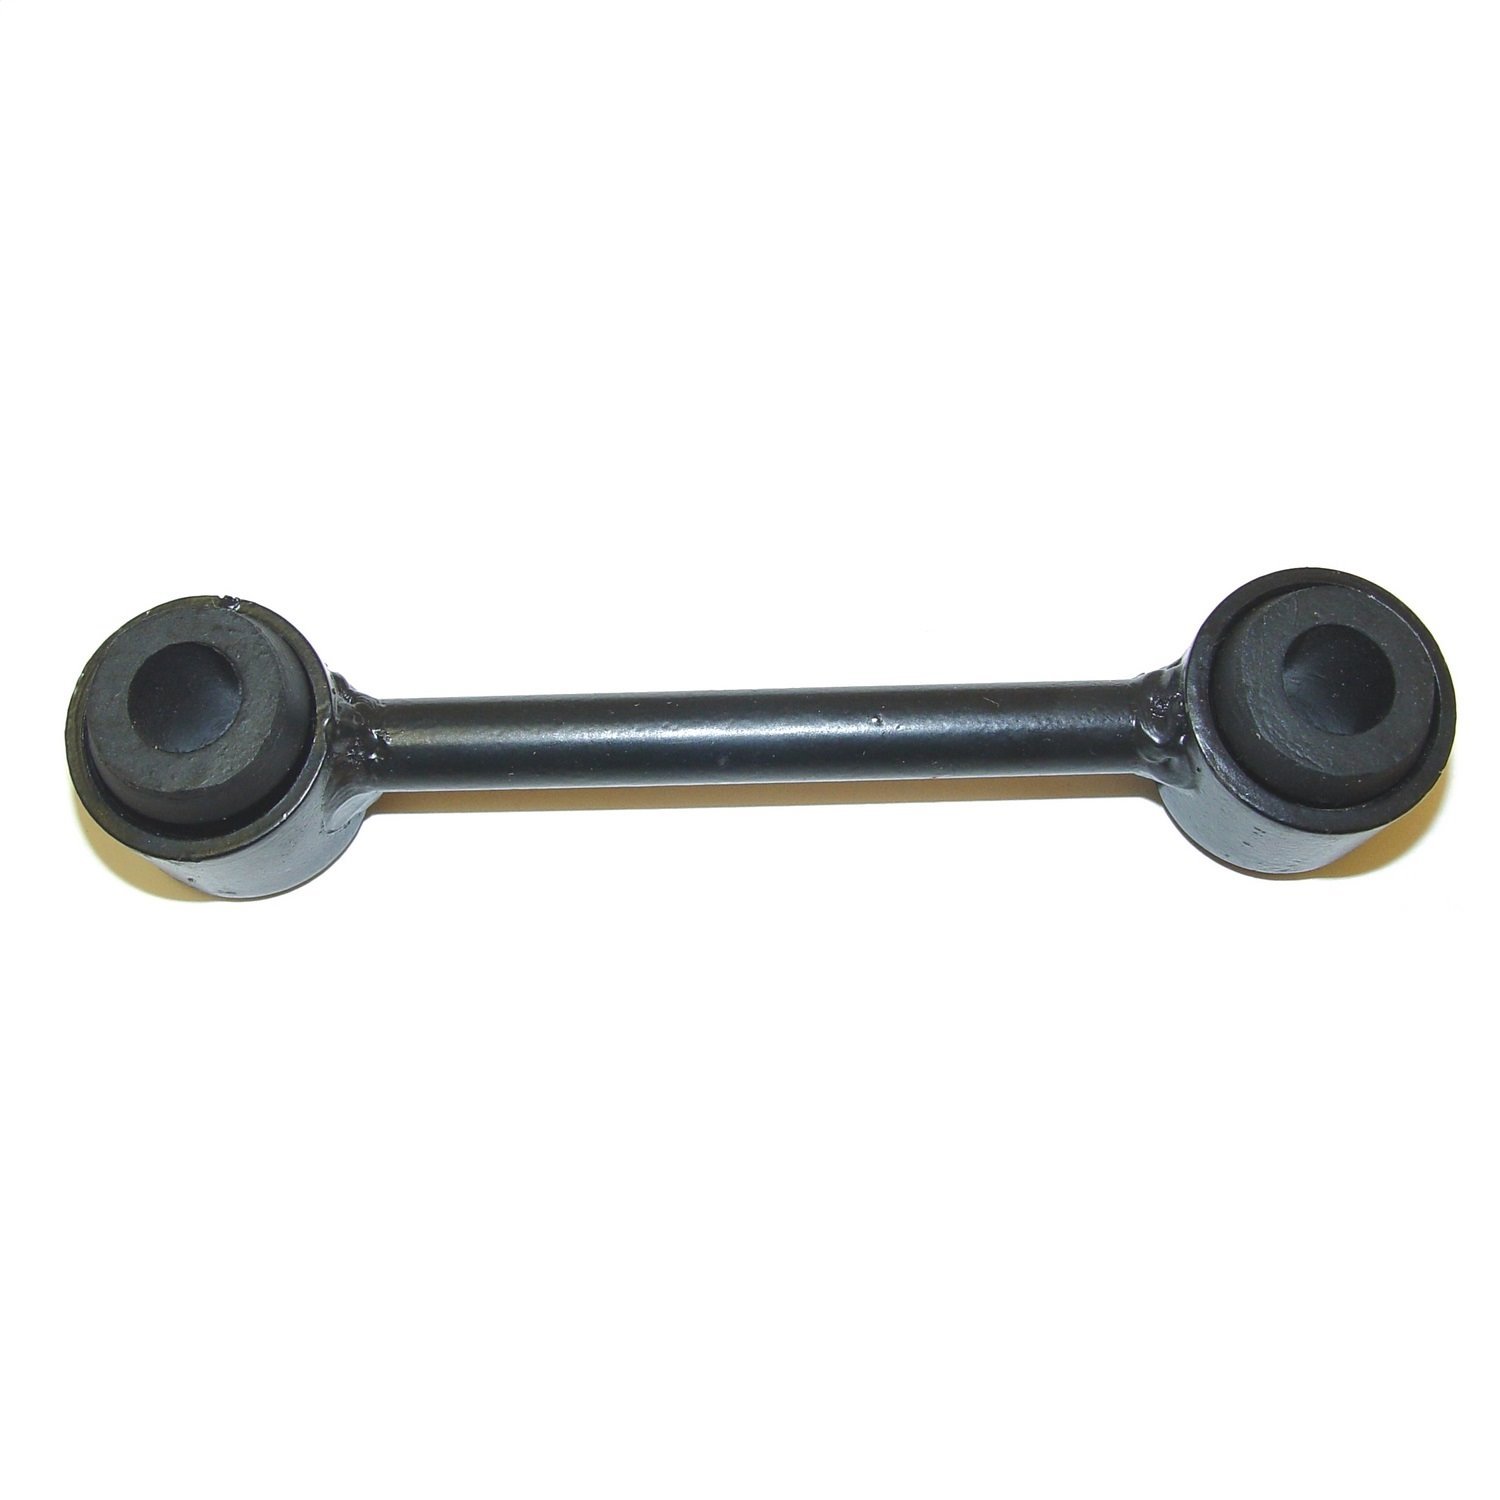 Replacement front sway bar end link from Omix-ADA, Fits 76-83 Jeep CJ5 76-86 CJ7 and 81-86 CJ8, Fits left or right sides.